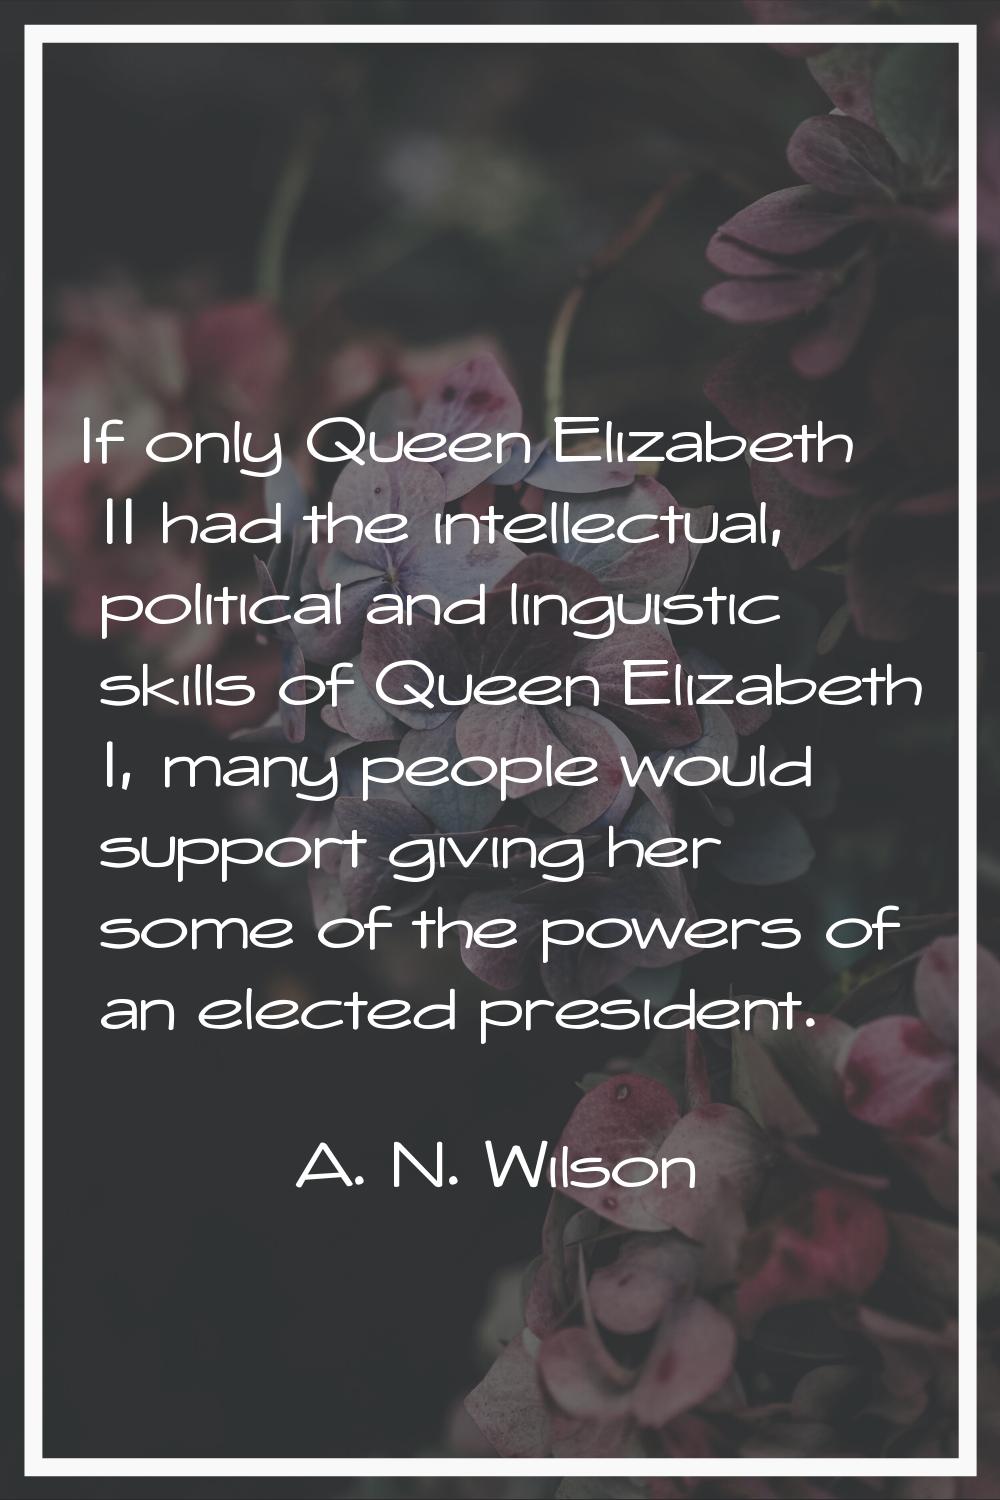 If only Queen Elizabeth II had the intellectual, political and linguistic skills of Queen Elizabeth